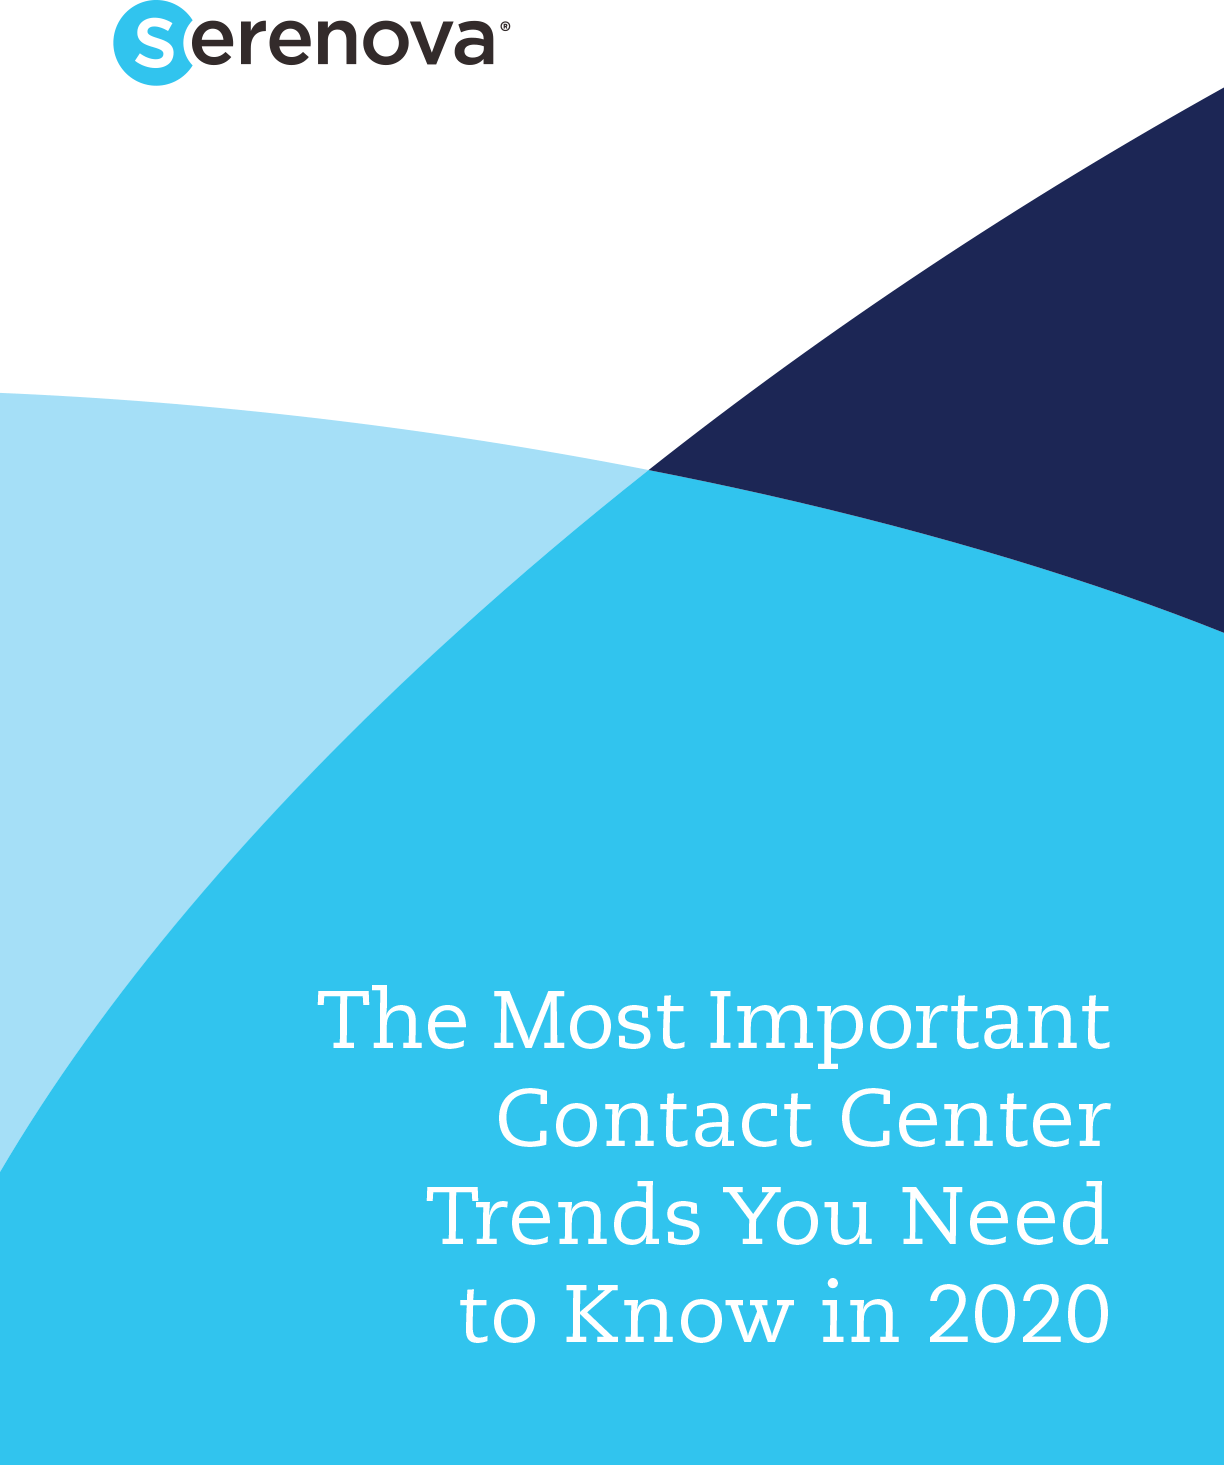 the_most_important_contact_center_trends_you_need_to_know_in_2020